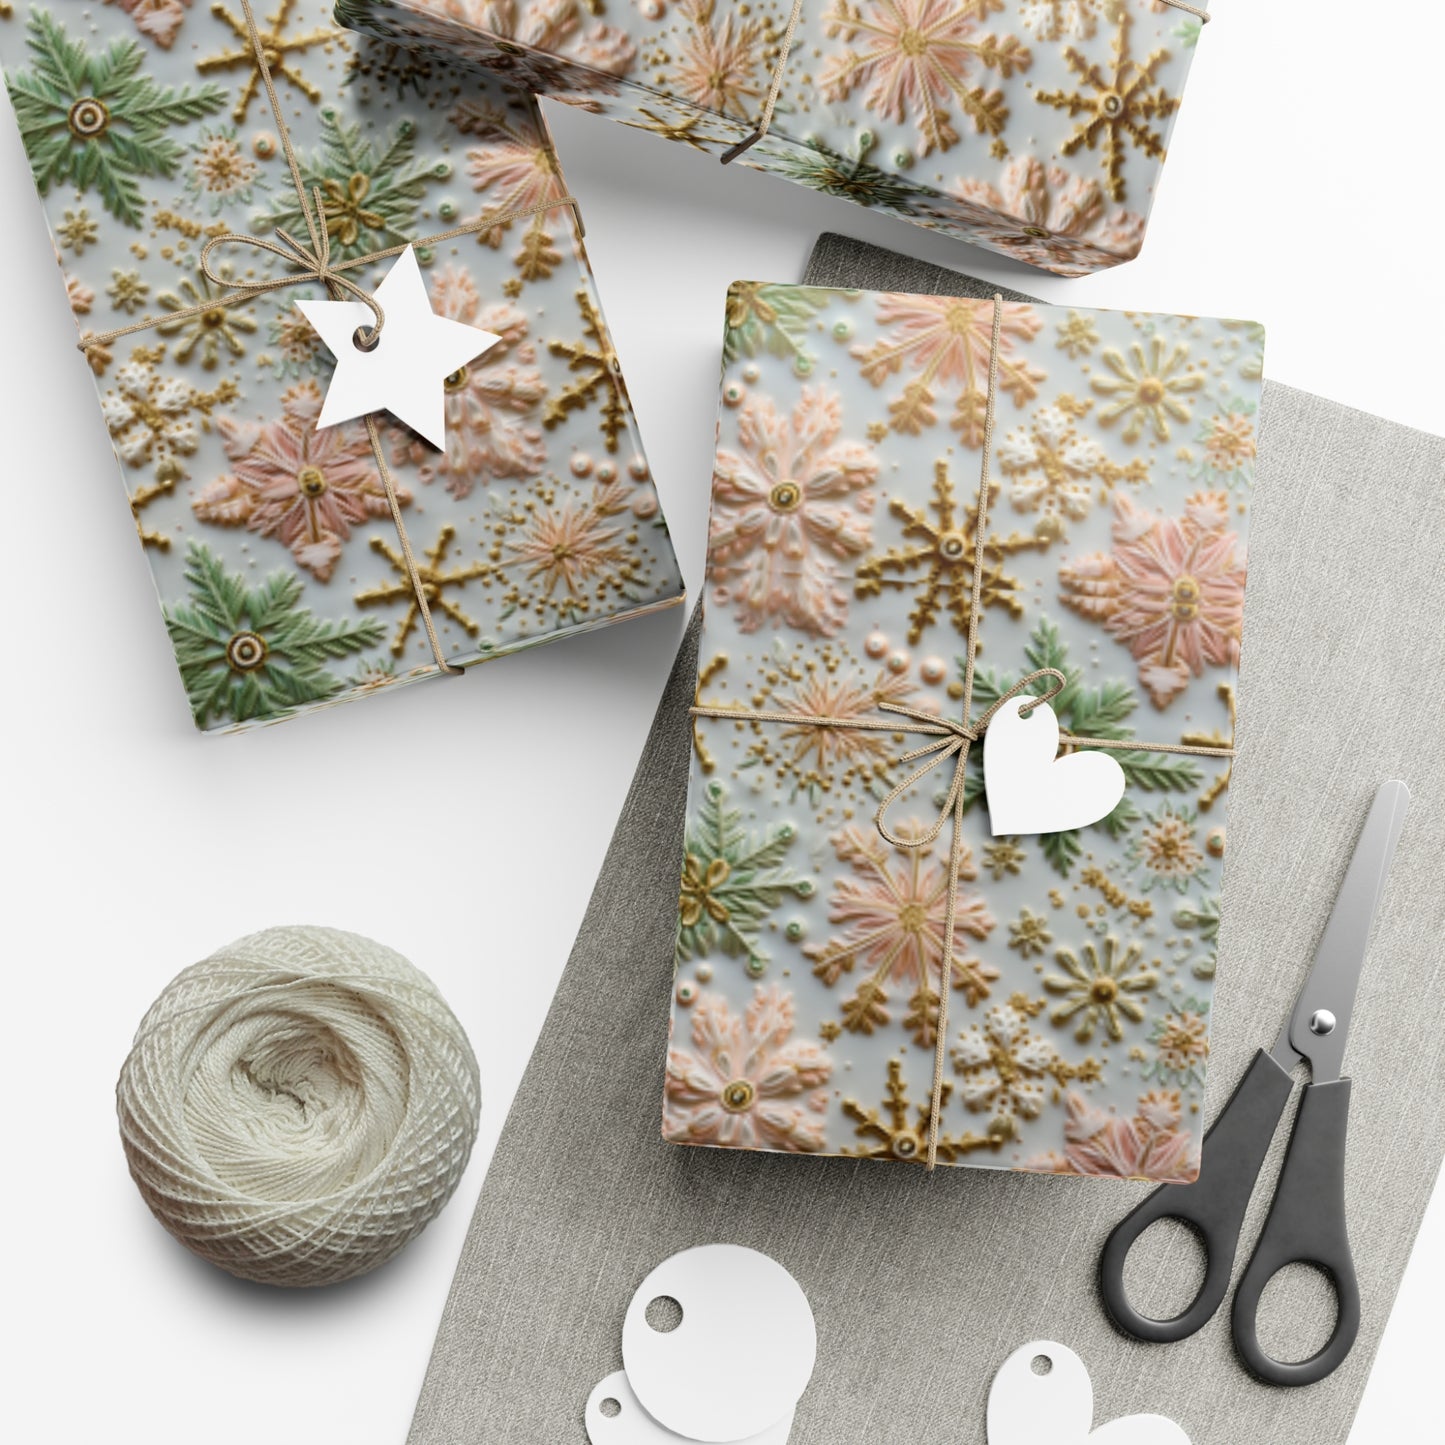 Elegant Embroidered Pastel Snowflakes Gift Wrap Unique Christmas Wrapping Paper Vintage Christmas Snowflakes Faux Embroidery